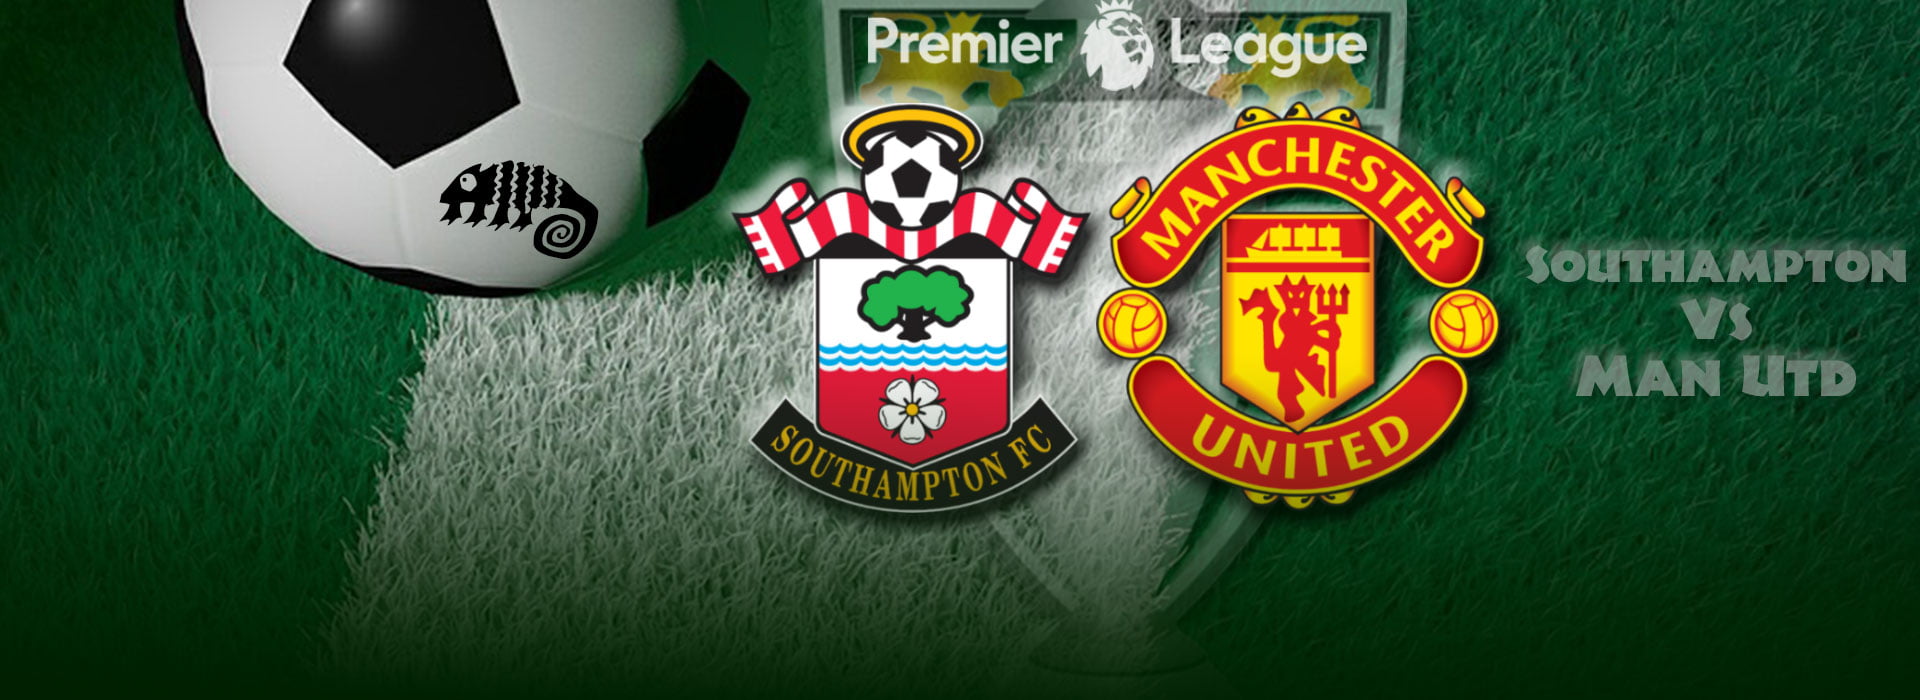 Southampton v Manchester United Premier League Match Predictions & Betting Tips